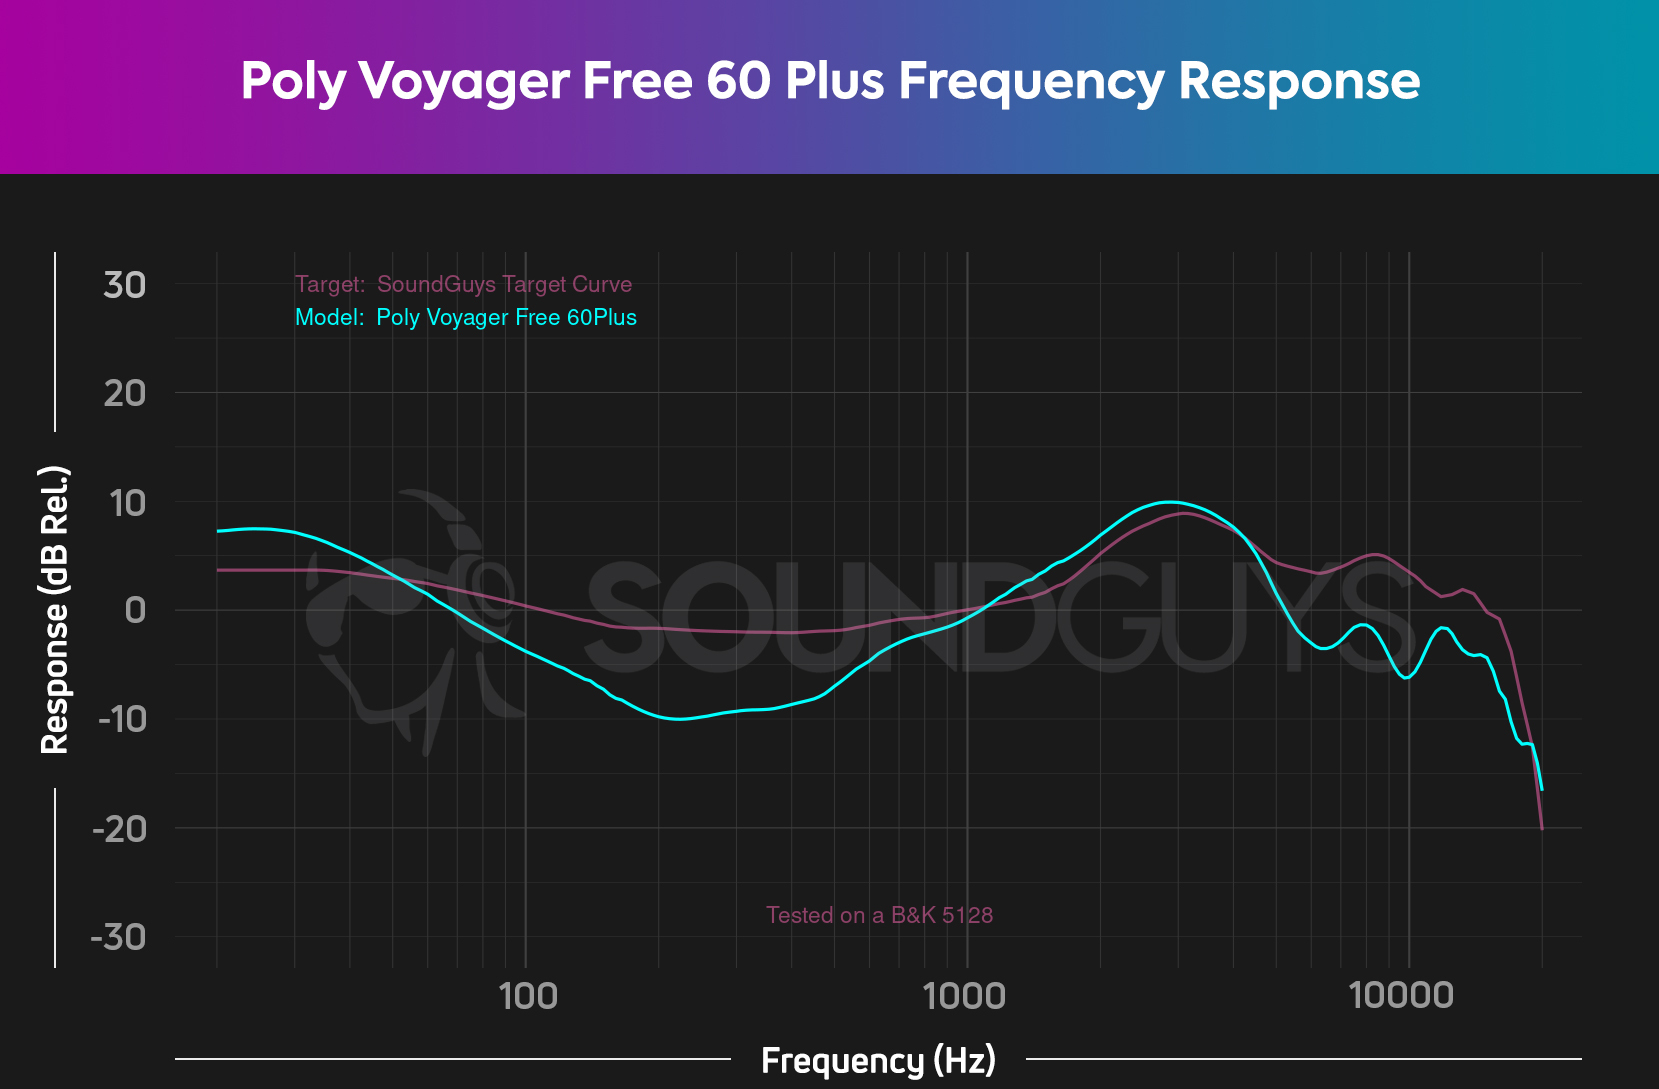 A frequency response chart for the Poly Voyager Free 60+, which follows our house curve relatively closely.